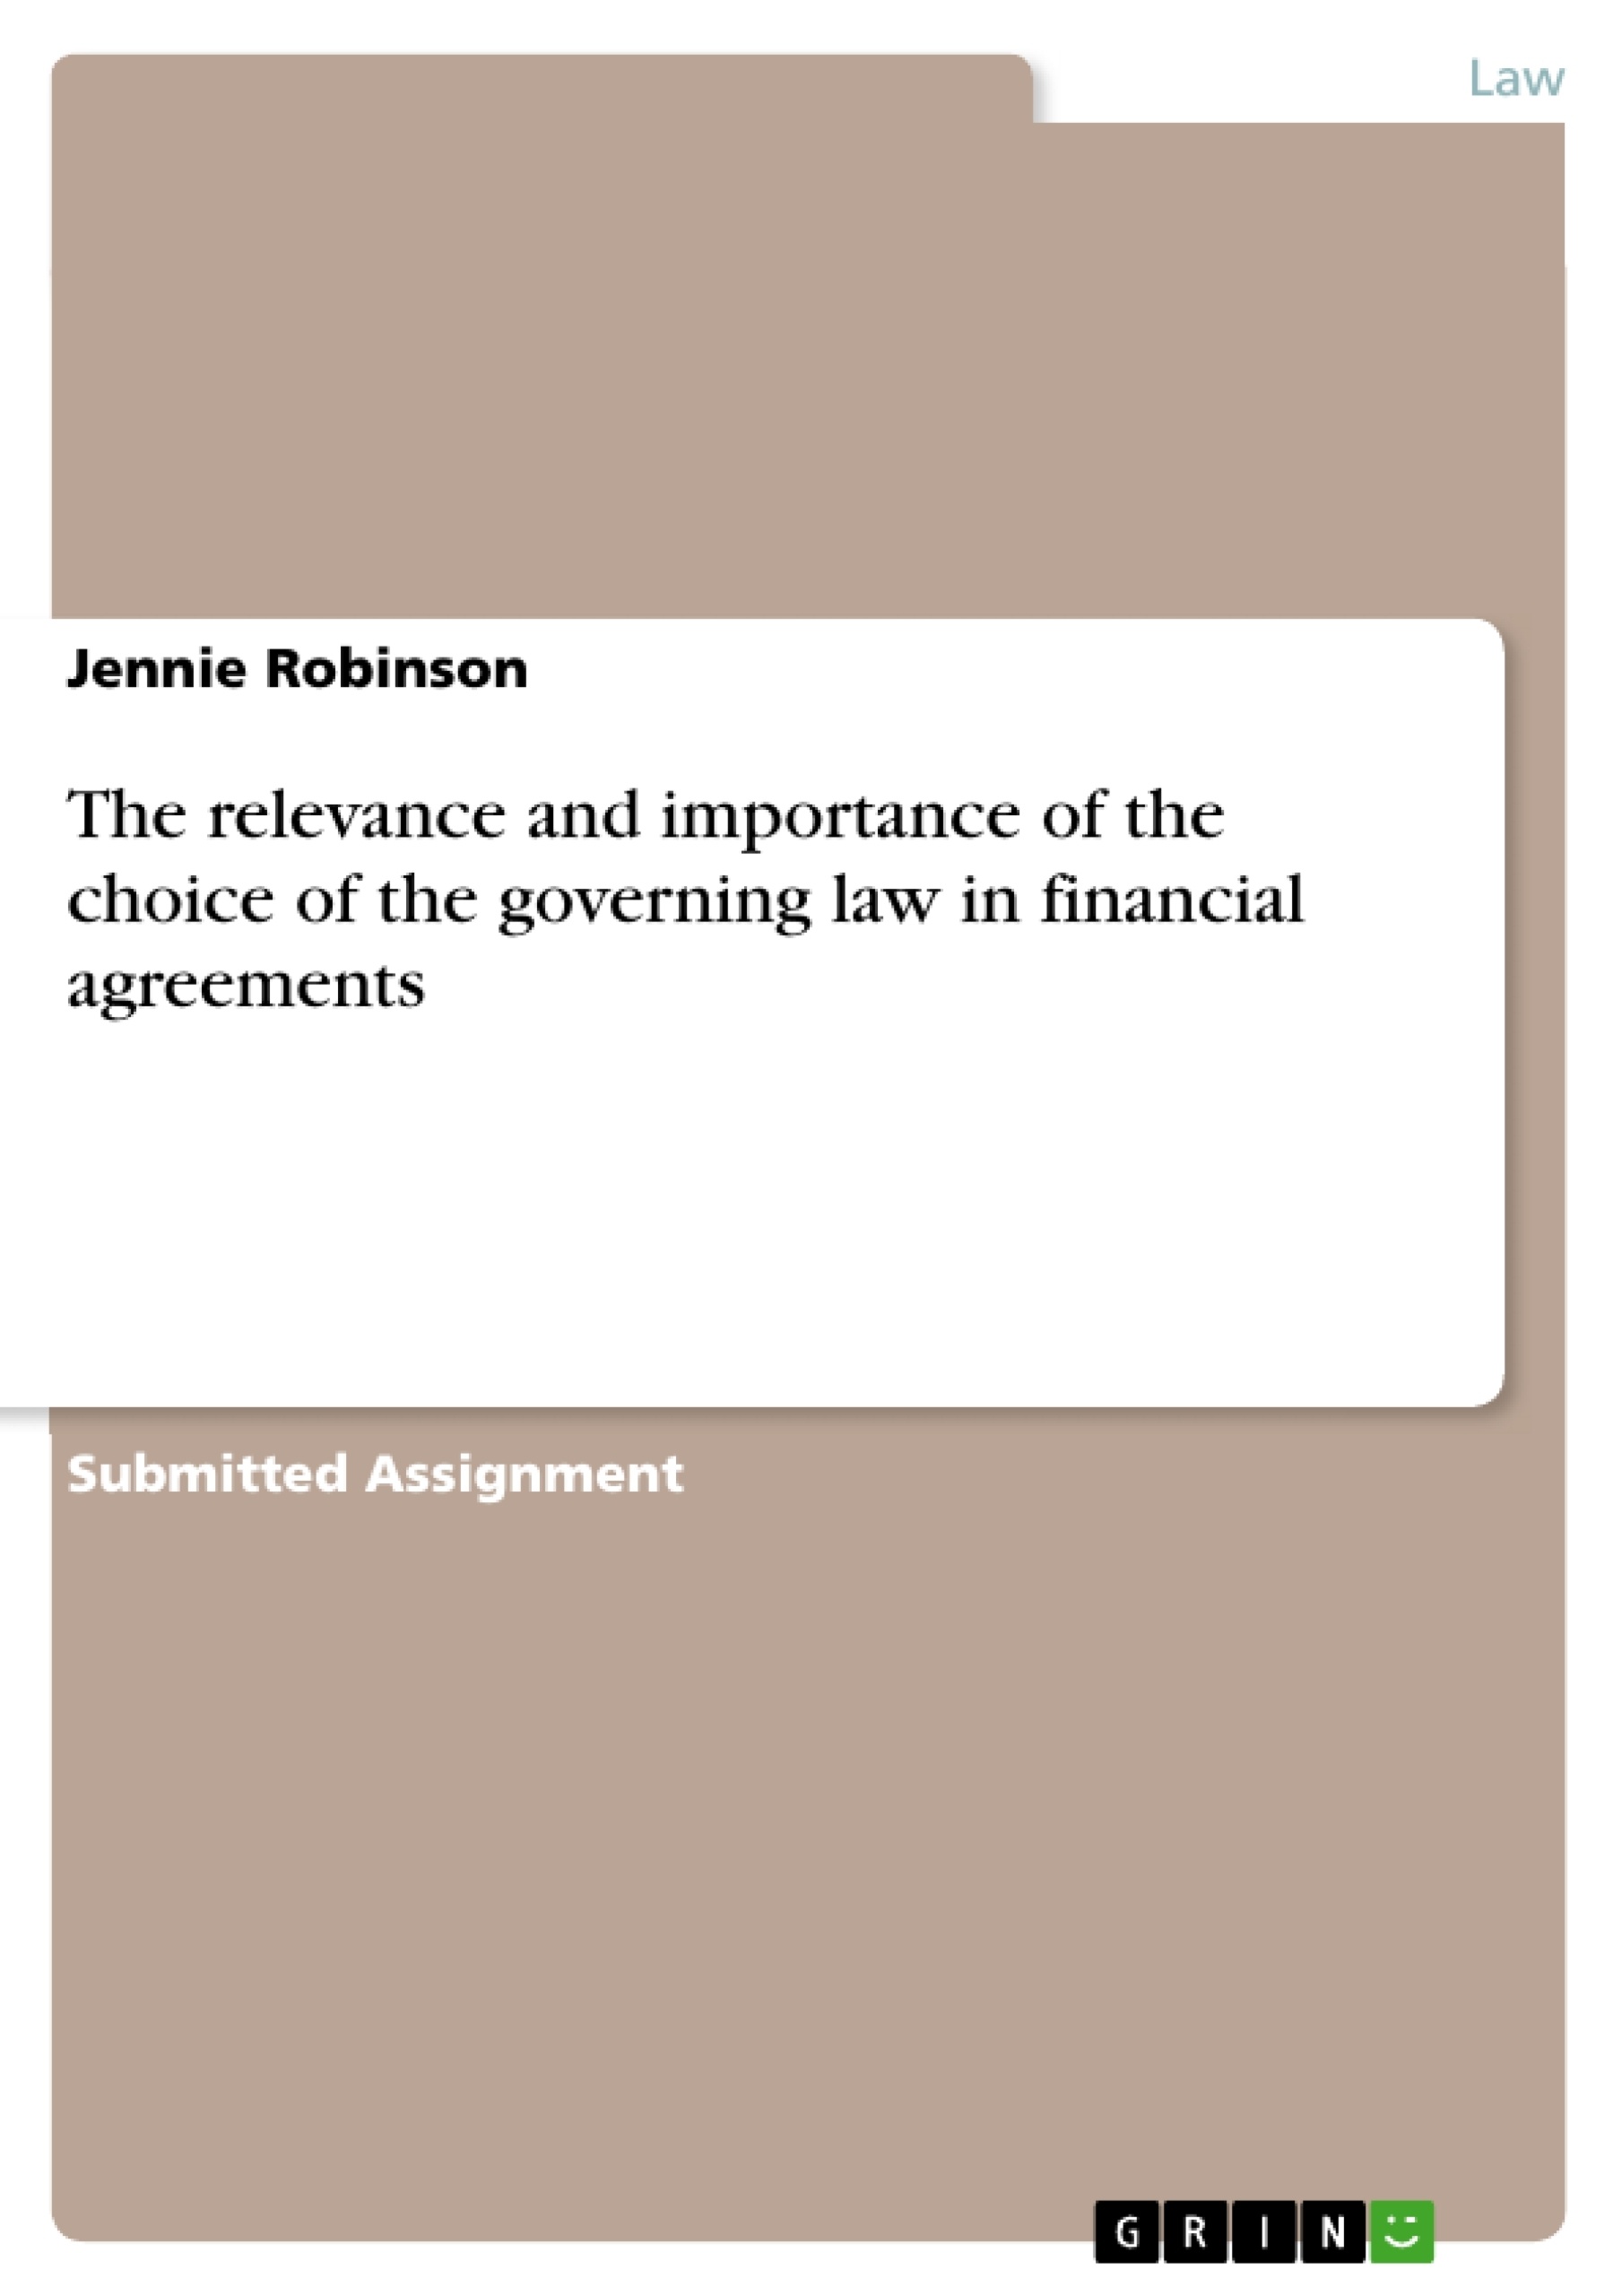 Titel: The relevance and importance of the choice of the governing law in financial agreements